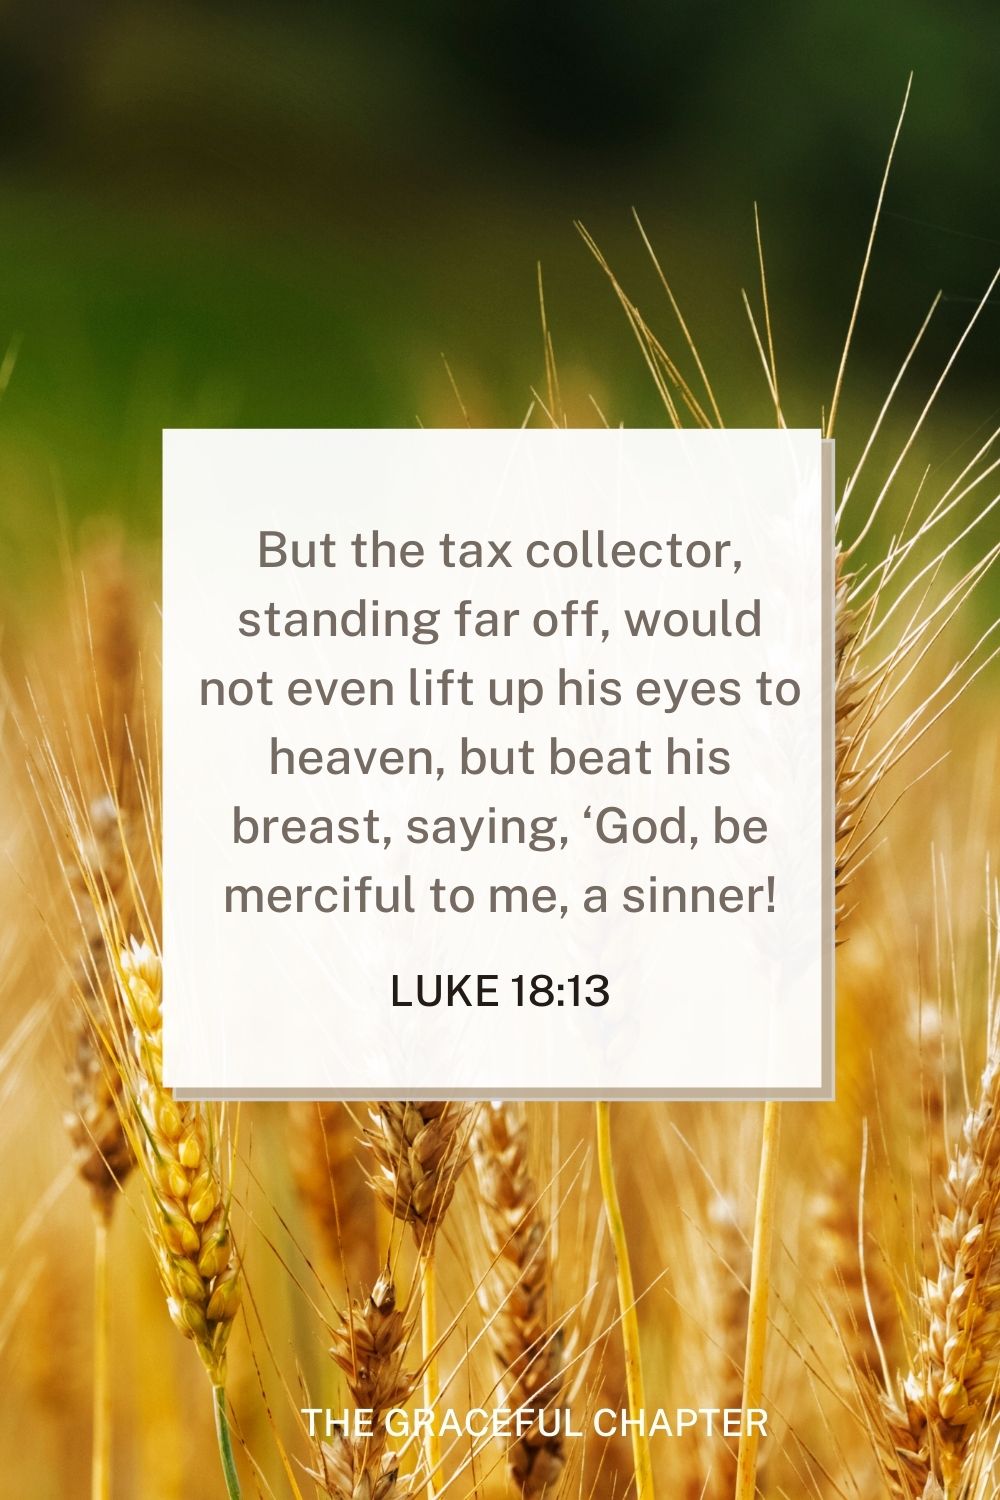 But the tax collector, standing far off, would not even lift up his eyes to heaven, but beat his breast, saying, ‘God, be merciful to me, a sinner!’ Luke 18:13